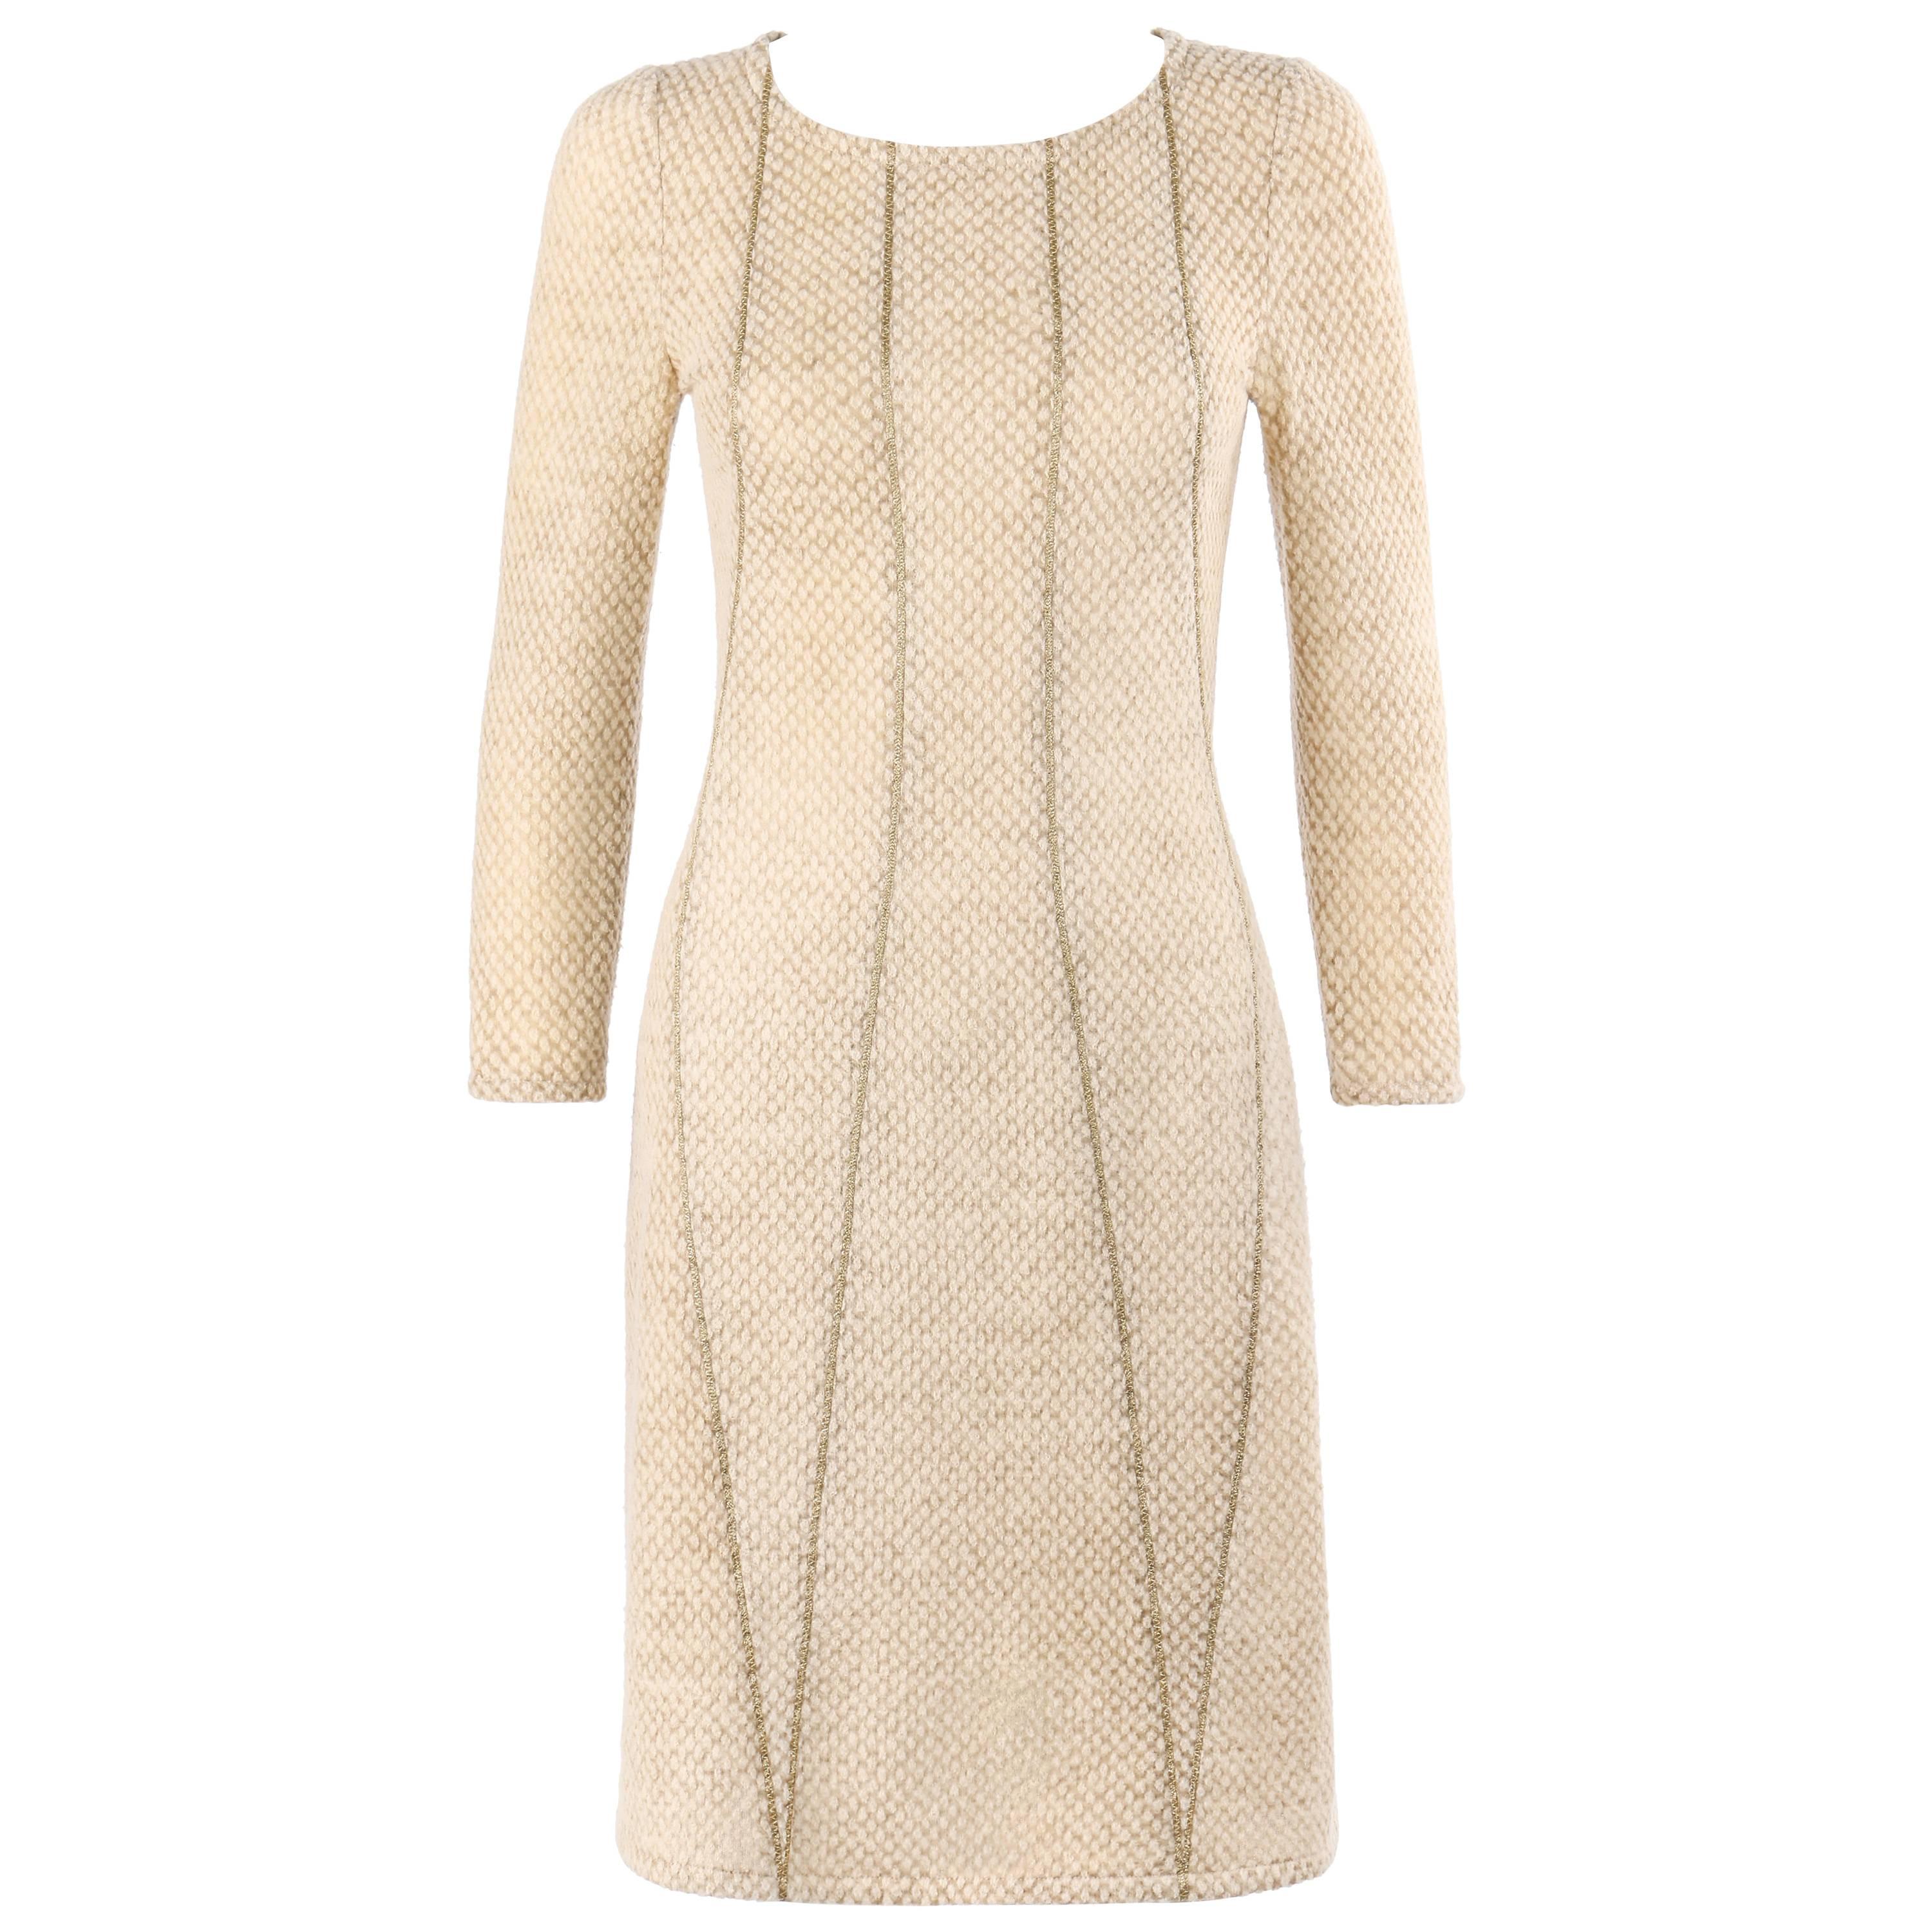 BOTTEGA VENETA A/W 2011 Biege Textured Wool Gold Piped Panel Cocktail Dress For Sale